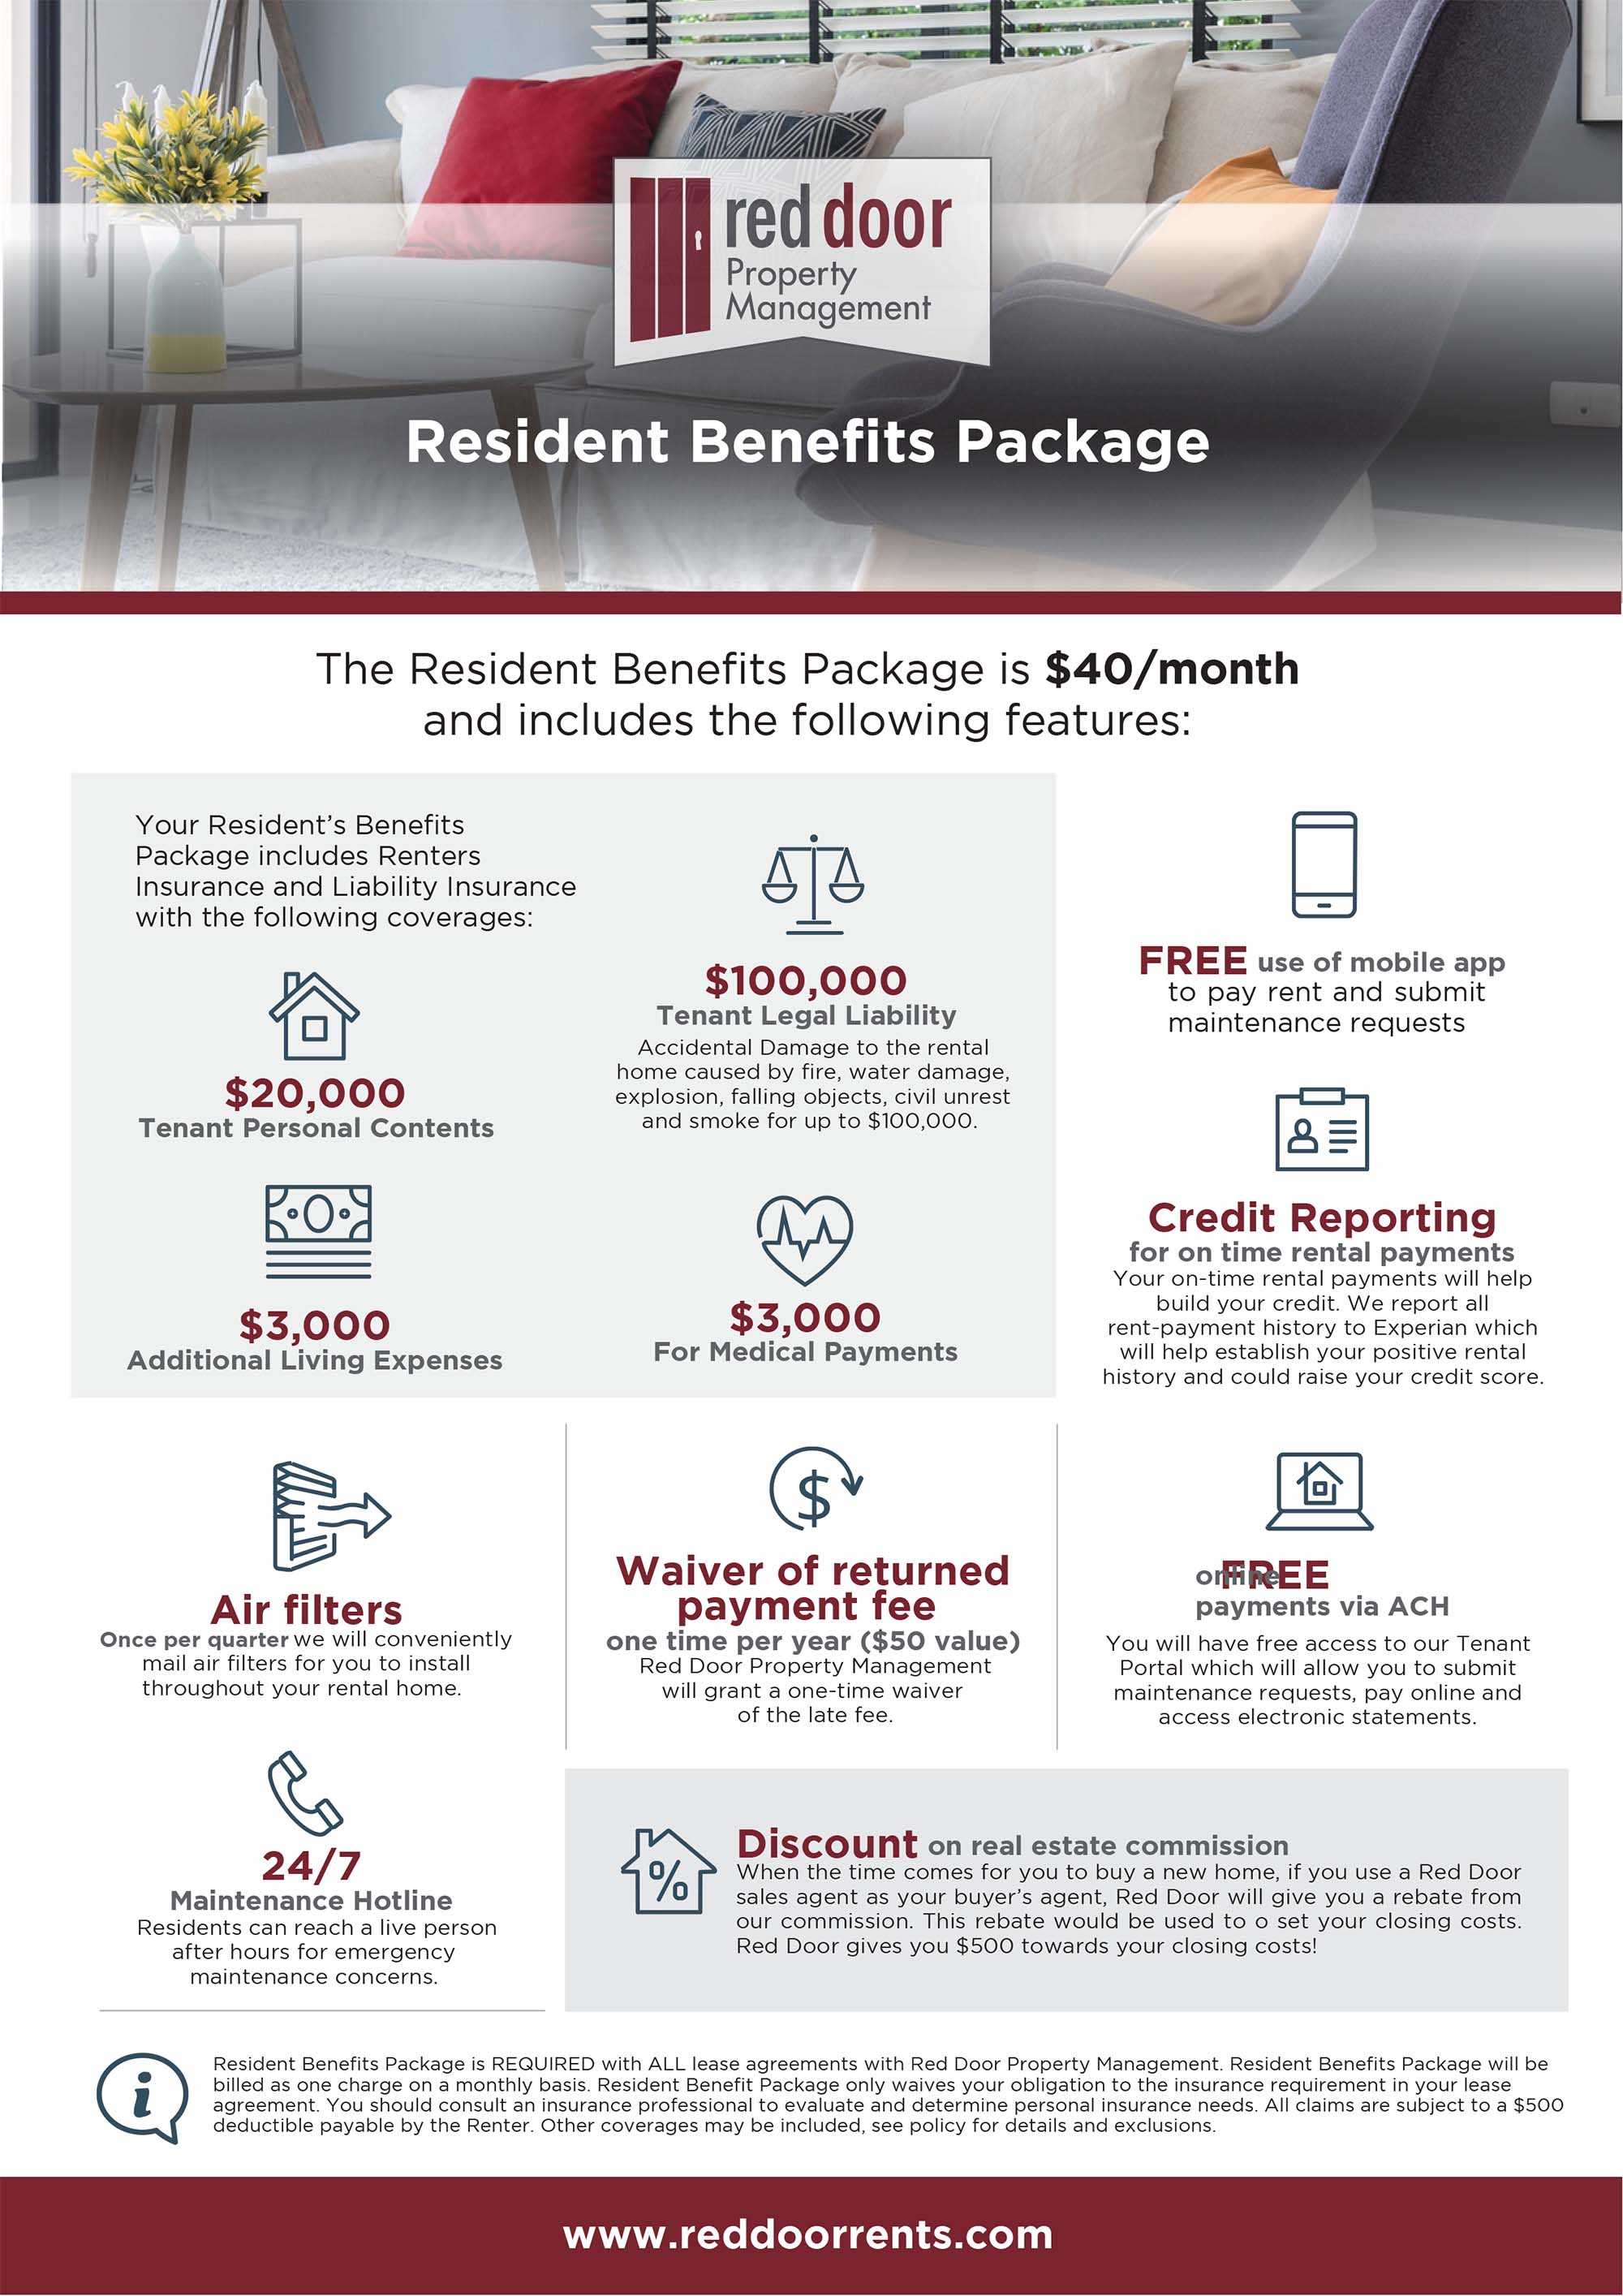 Resident Benefits Package